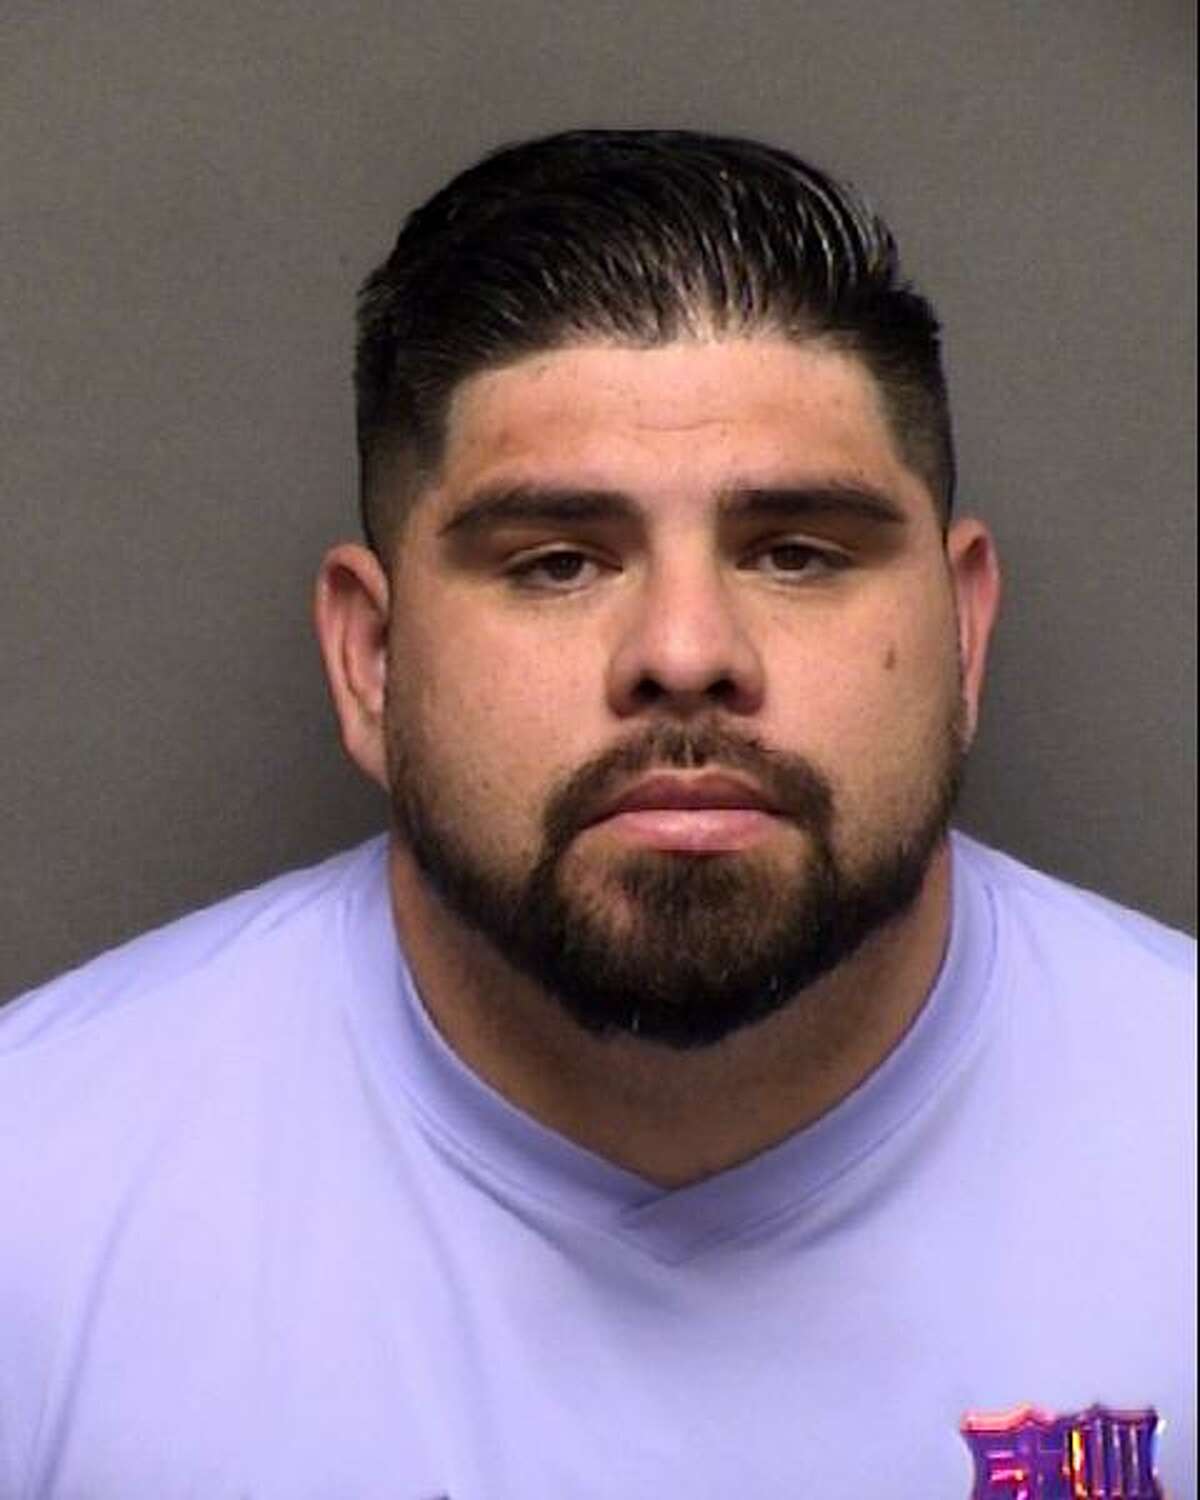 Deputy Ernesto Garza, 32, was arrested July 1 and charged with driving while intoxicated and evading arrest.